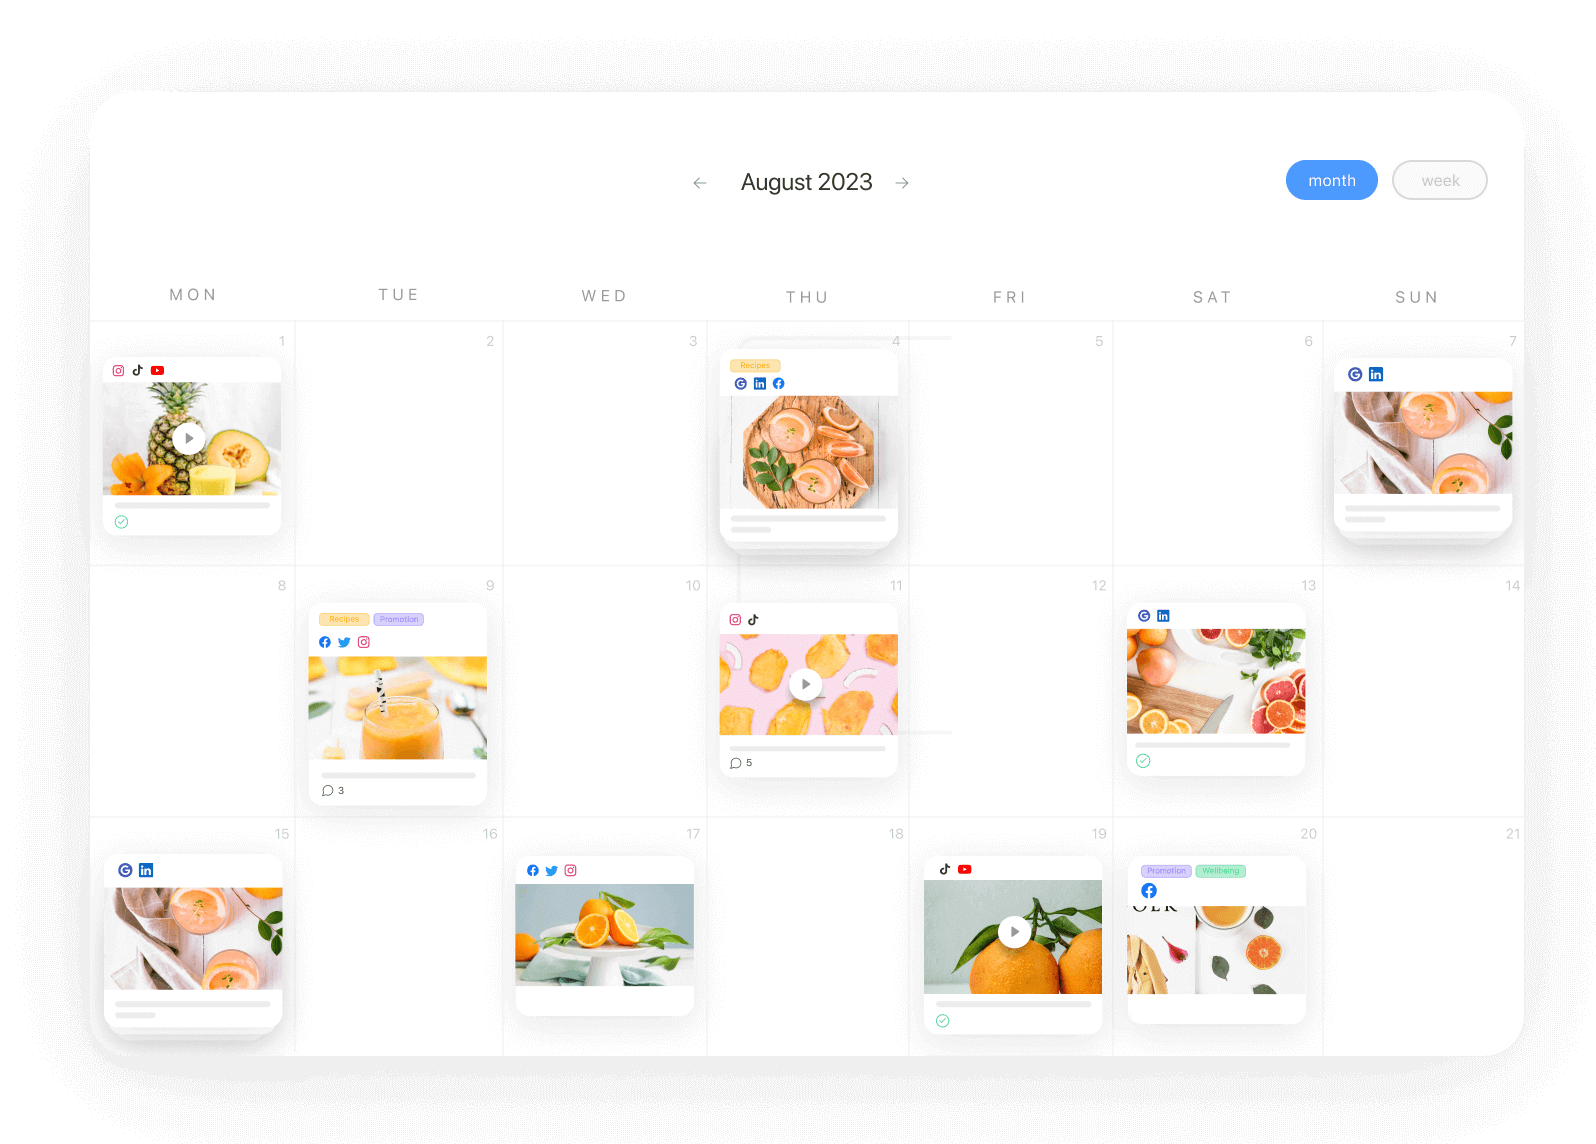 Content calendar in a monthly view